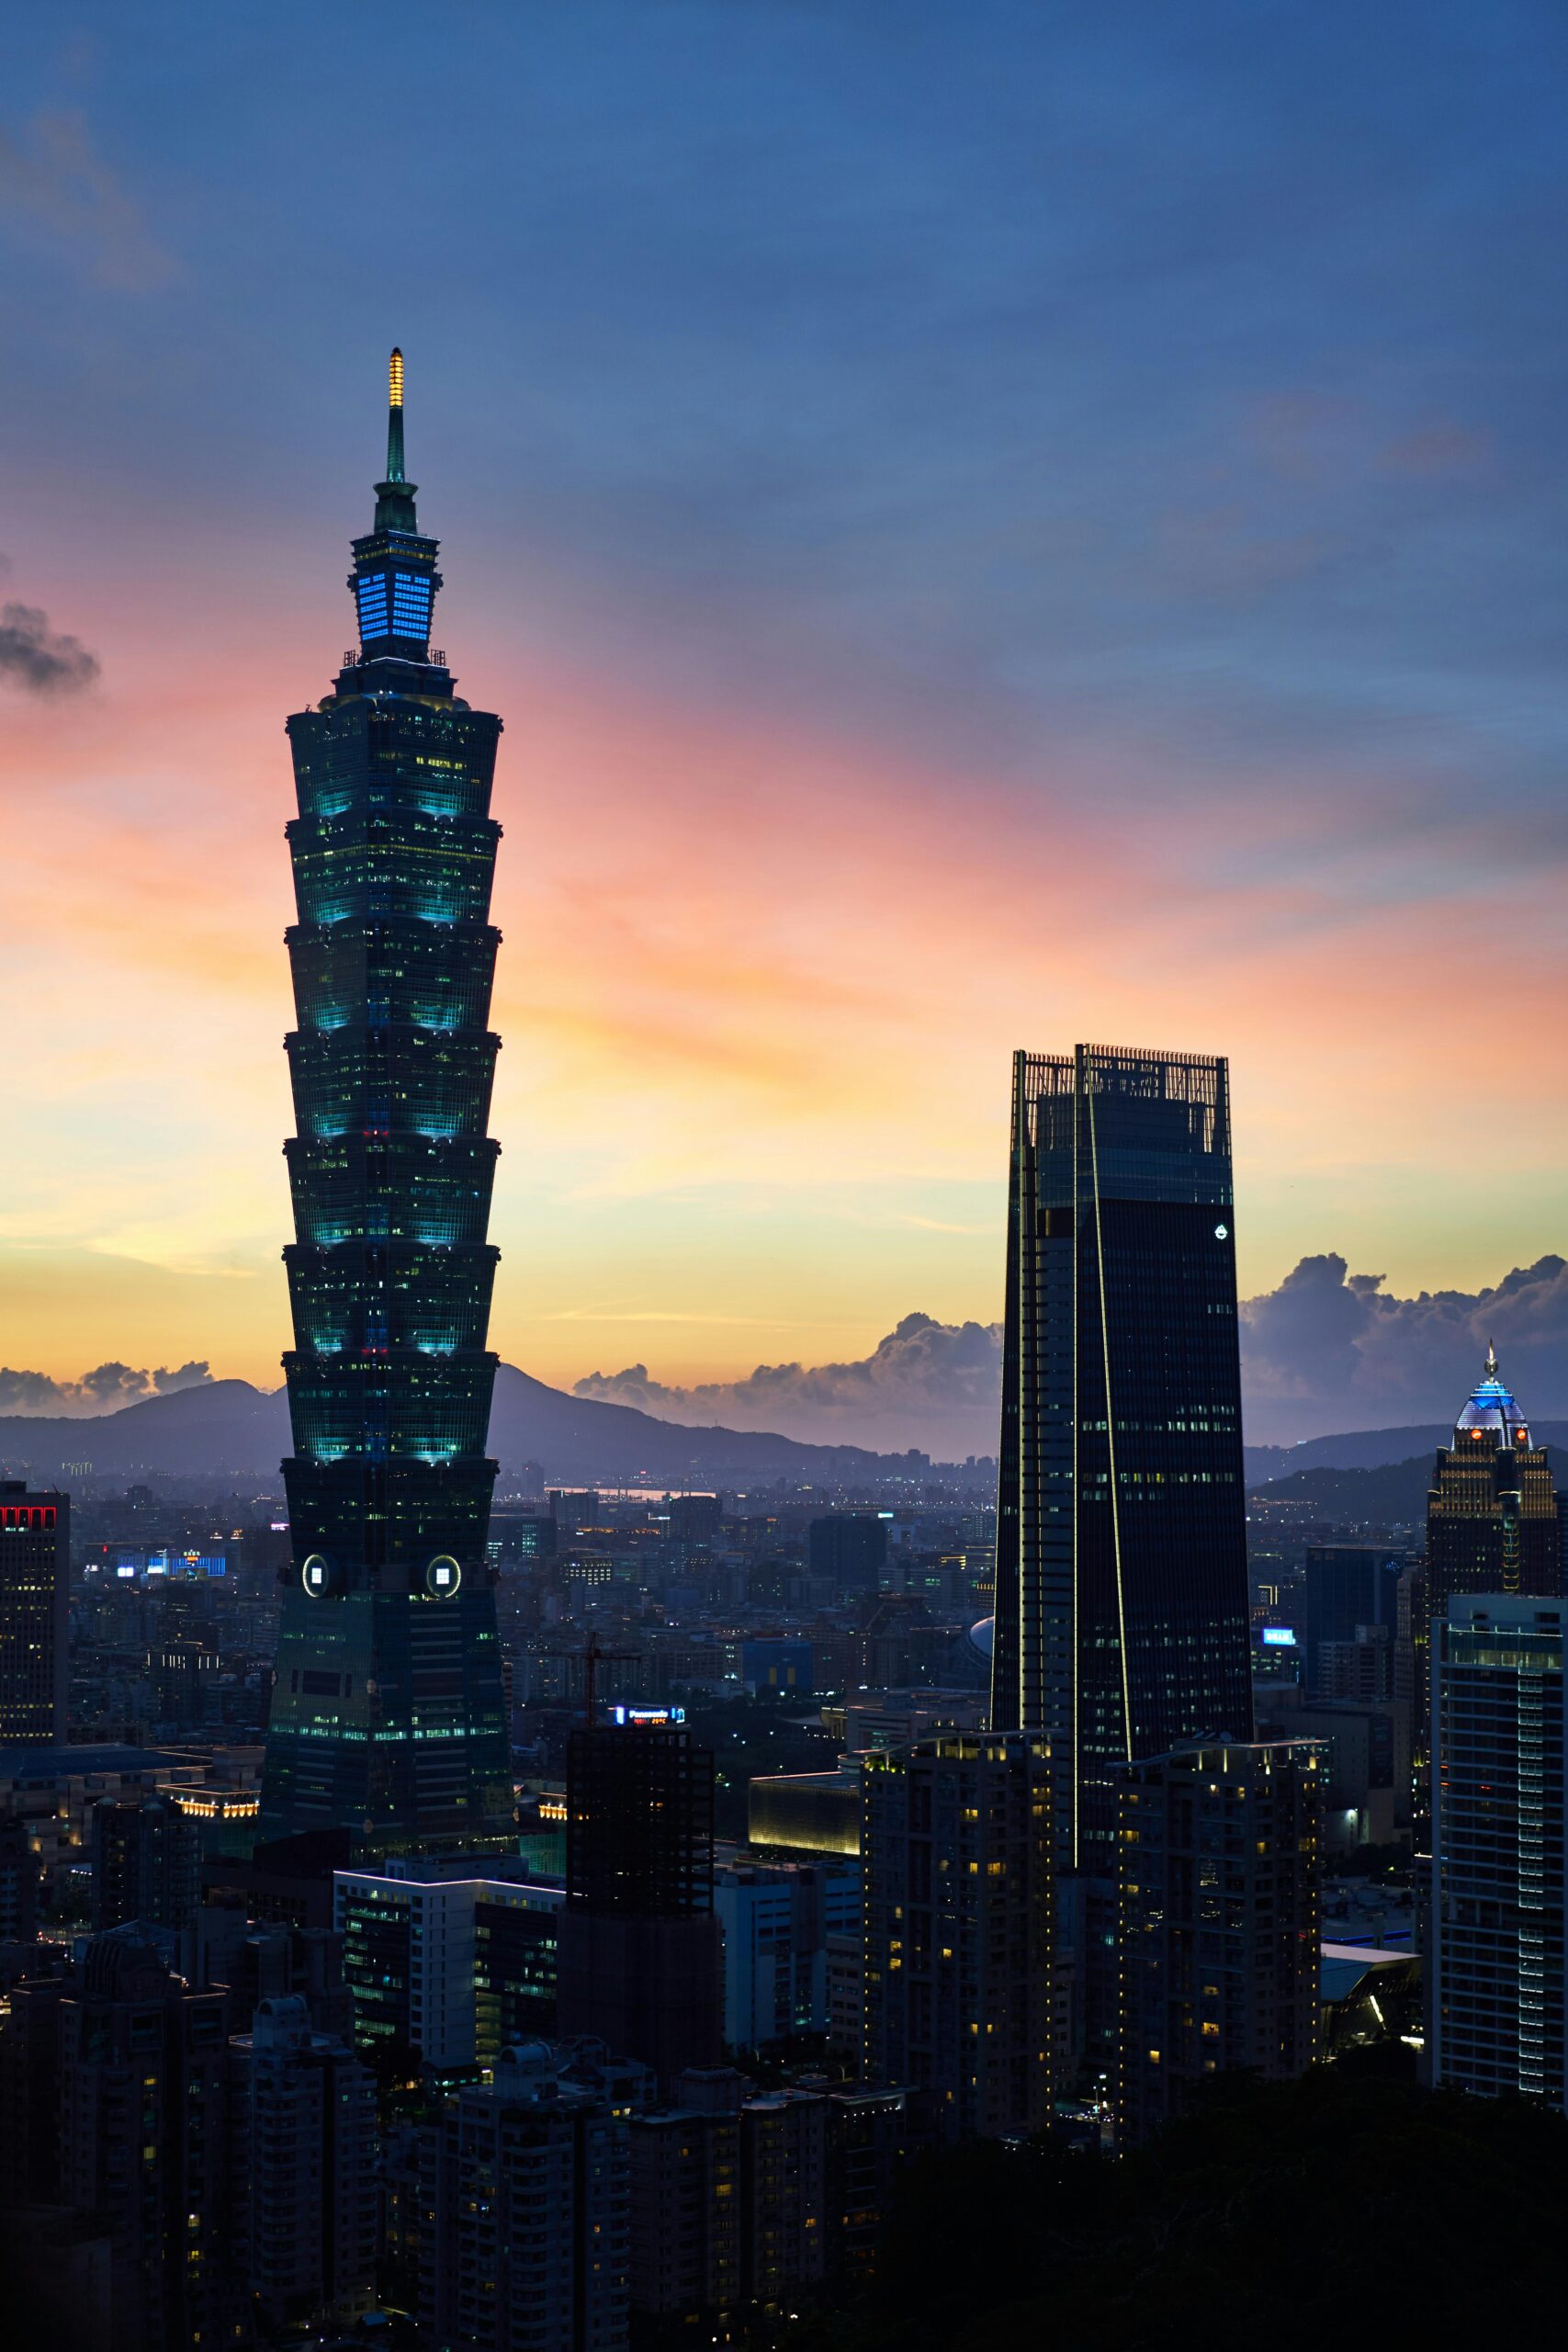 Taiwan – “The Heart of Asia”